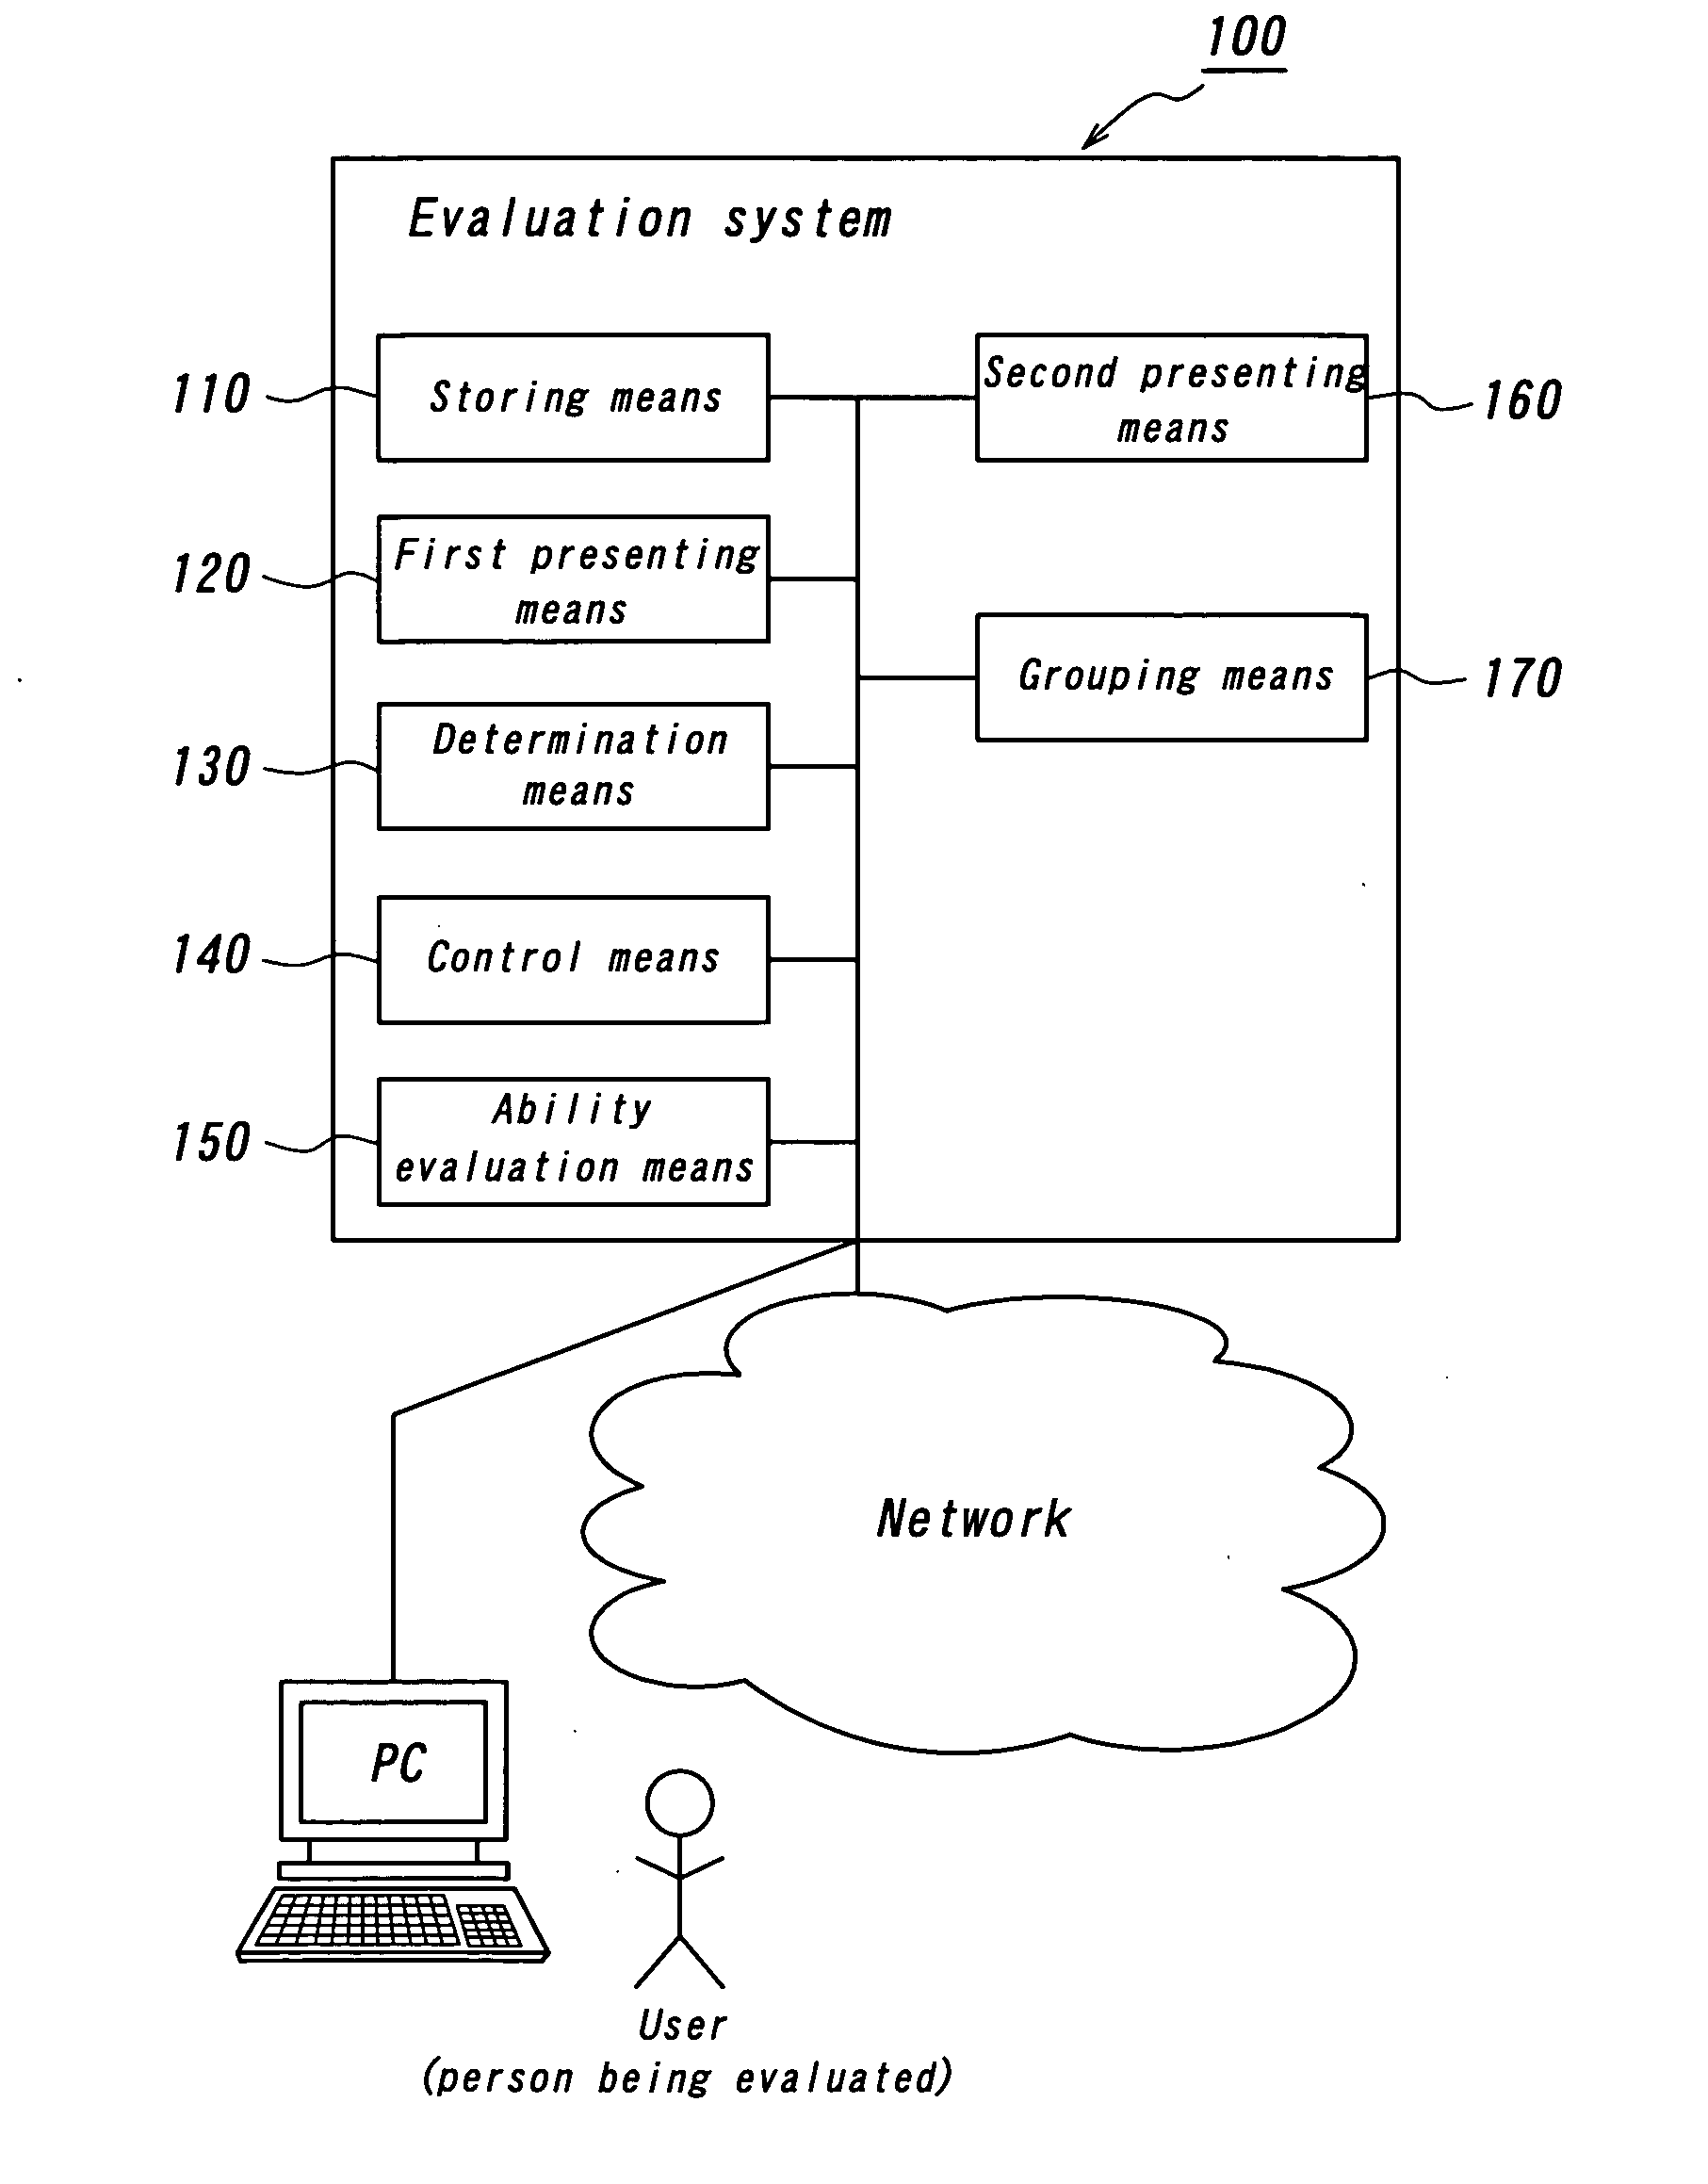 Evaluation system, method and program for evaluating ability